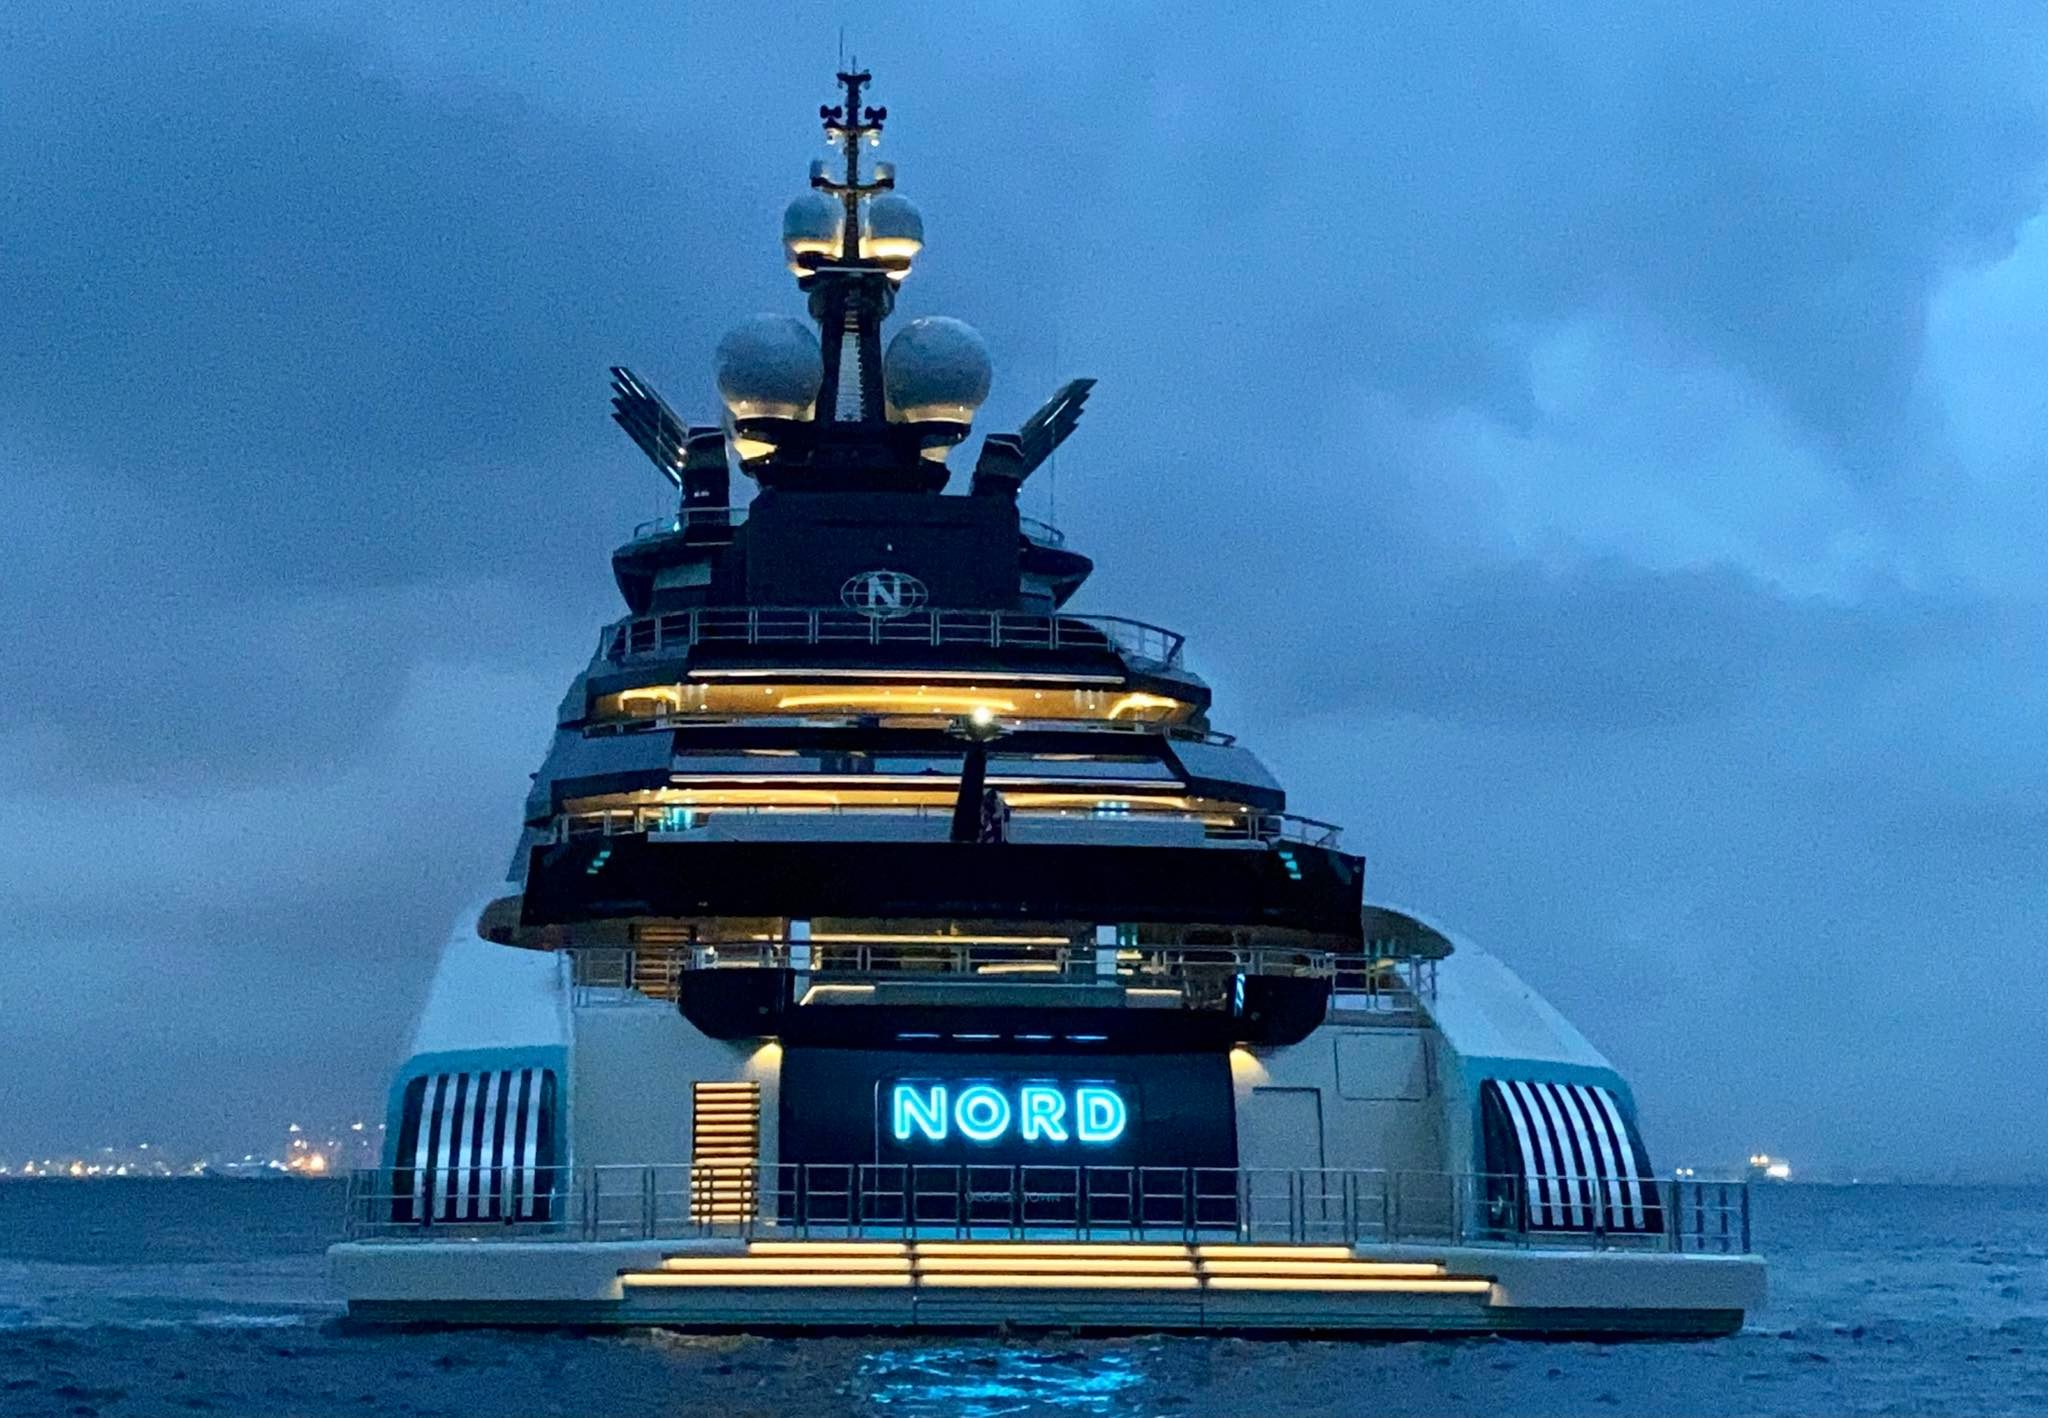 where is nord yacht now